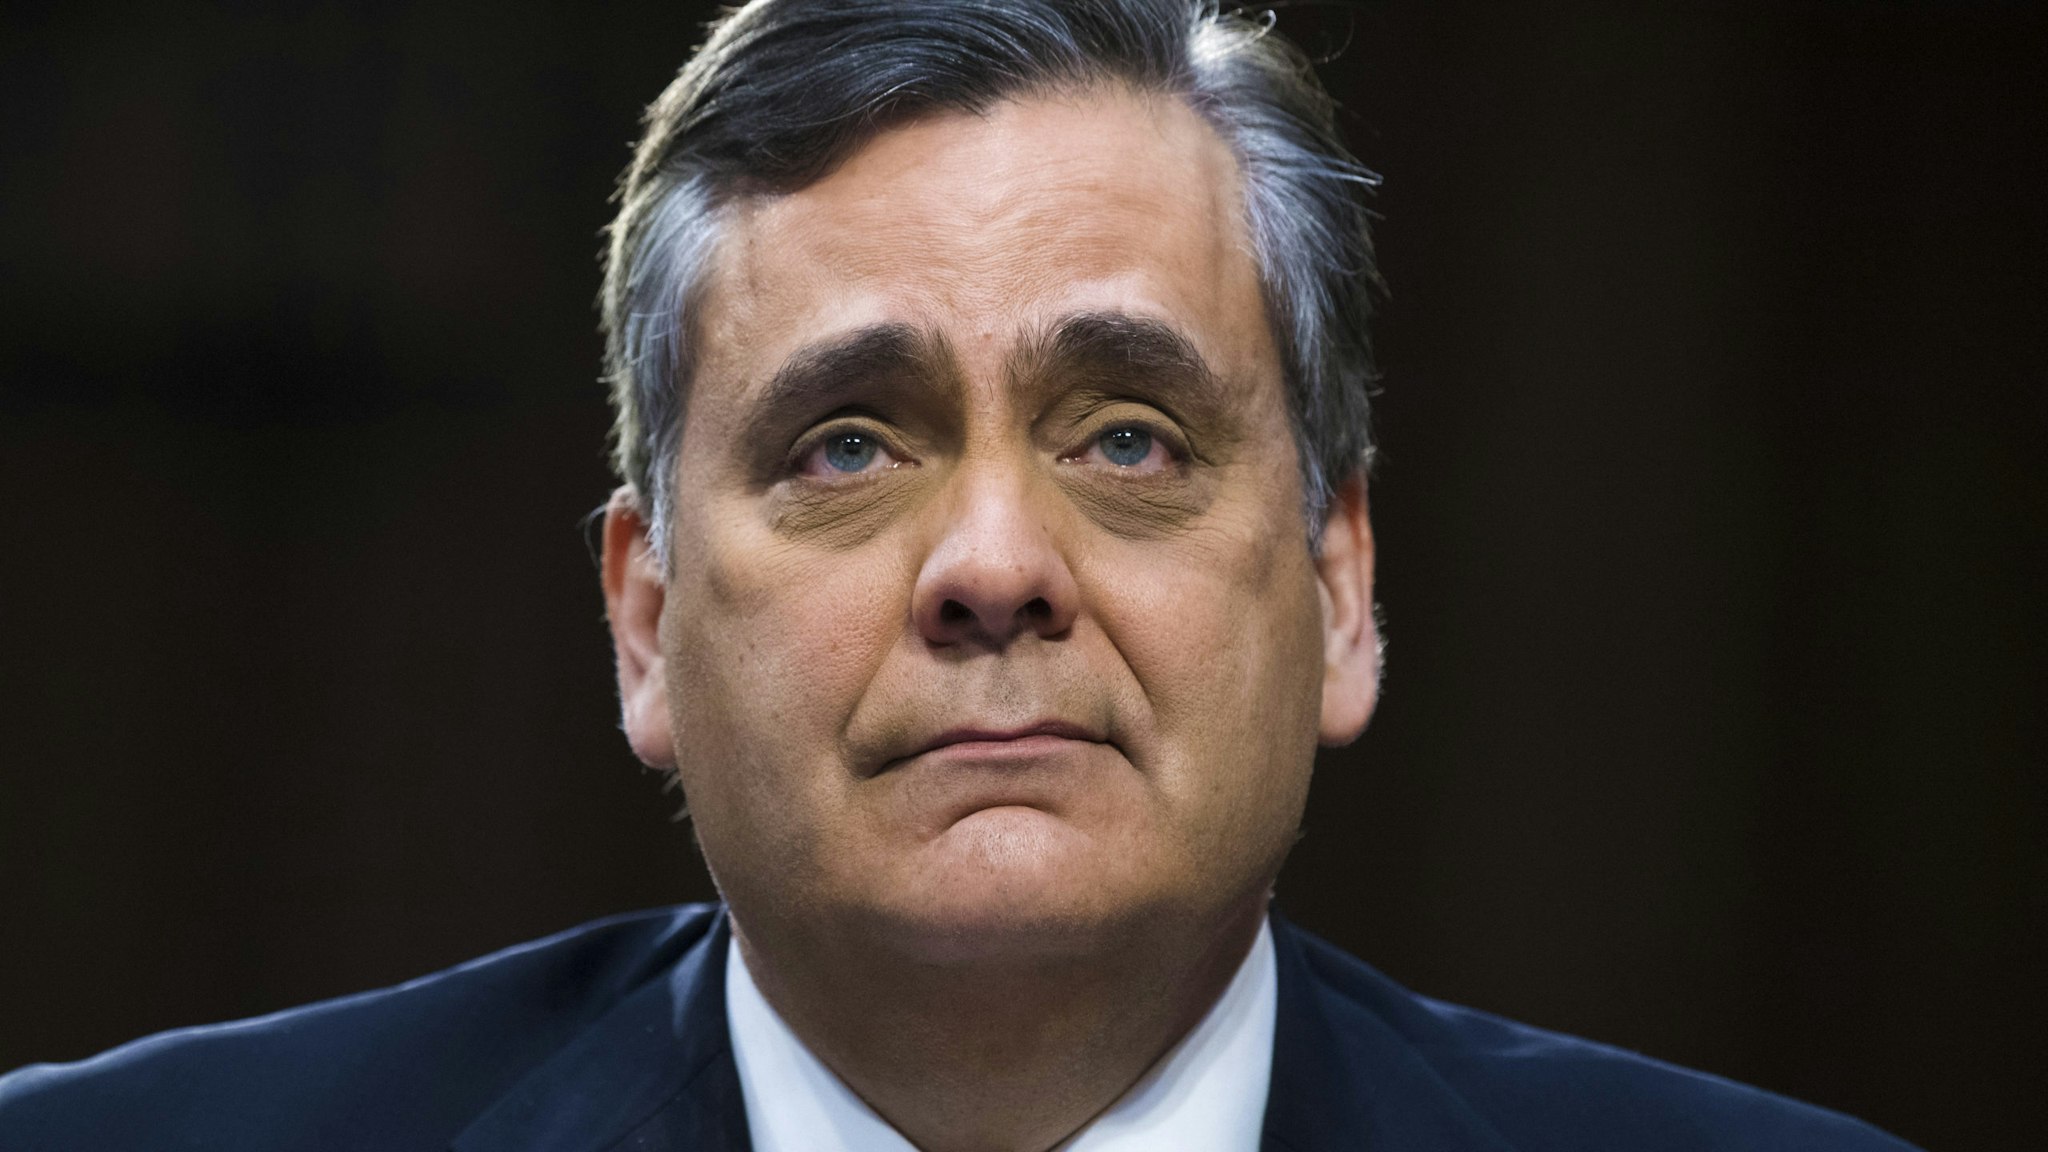 UNITED STATES - JANUARY 16: Jonathan Turley, a professor at George Washington University Law School, attends a Senate Judiciary Committee confirmation hearing for William P. Barr, nominee for attorney general, in Hart Building on Wednesday, January 16, 2019.